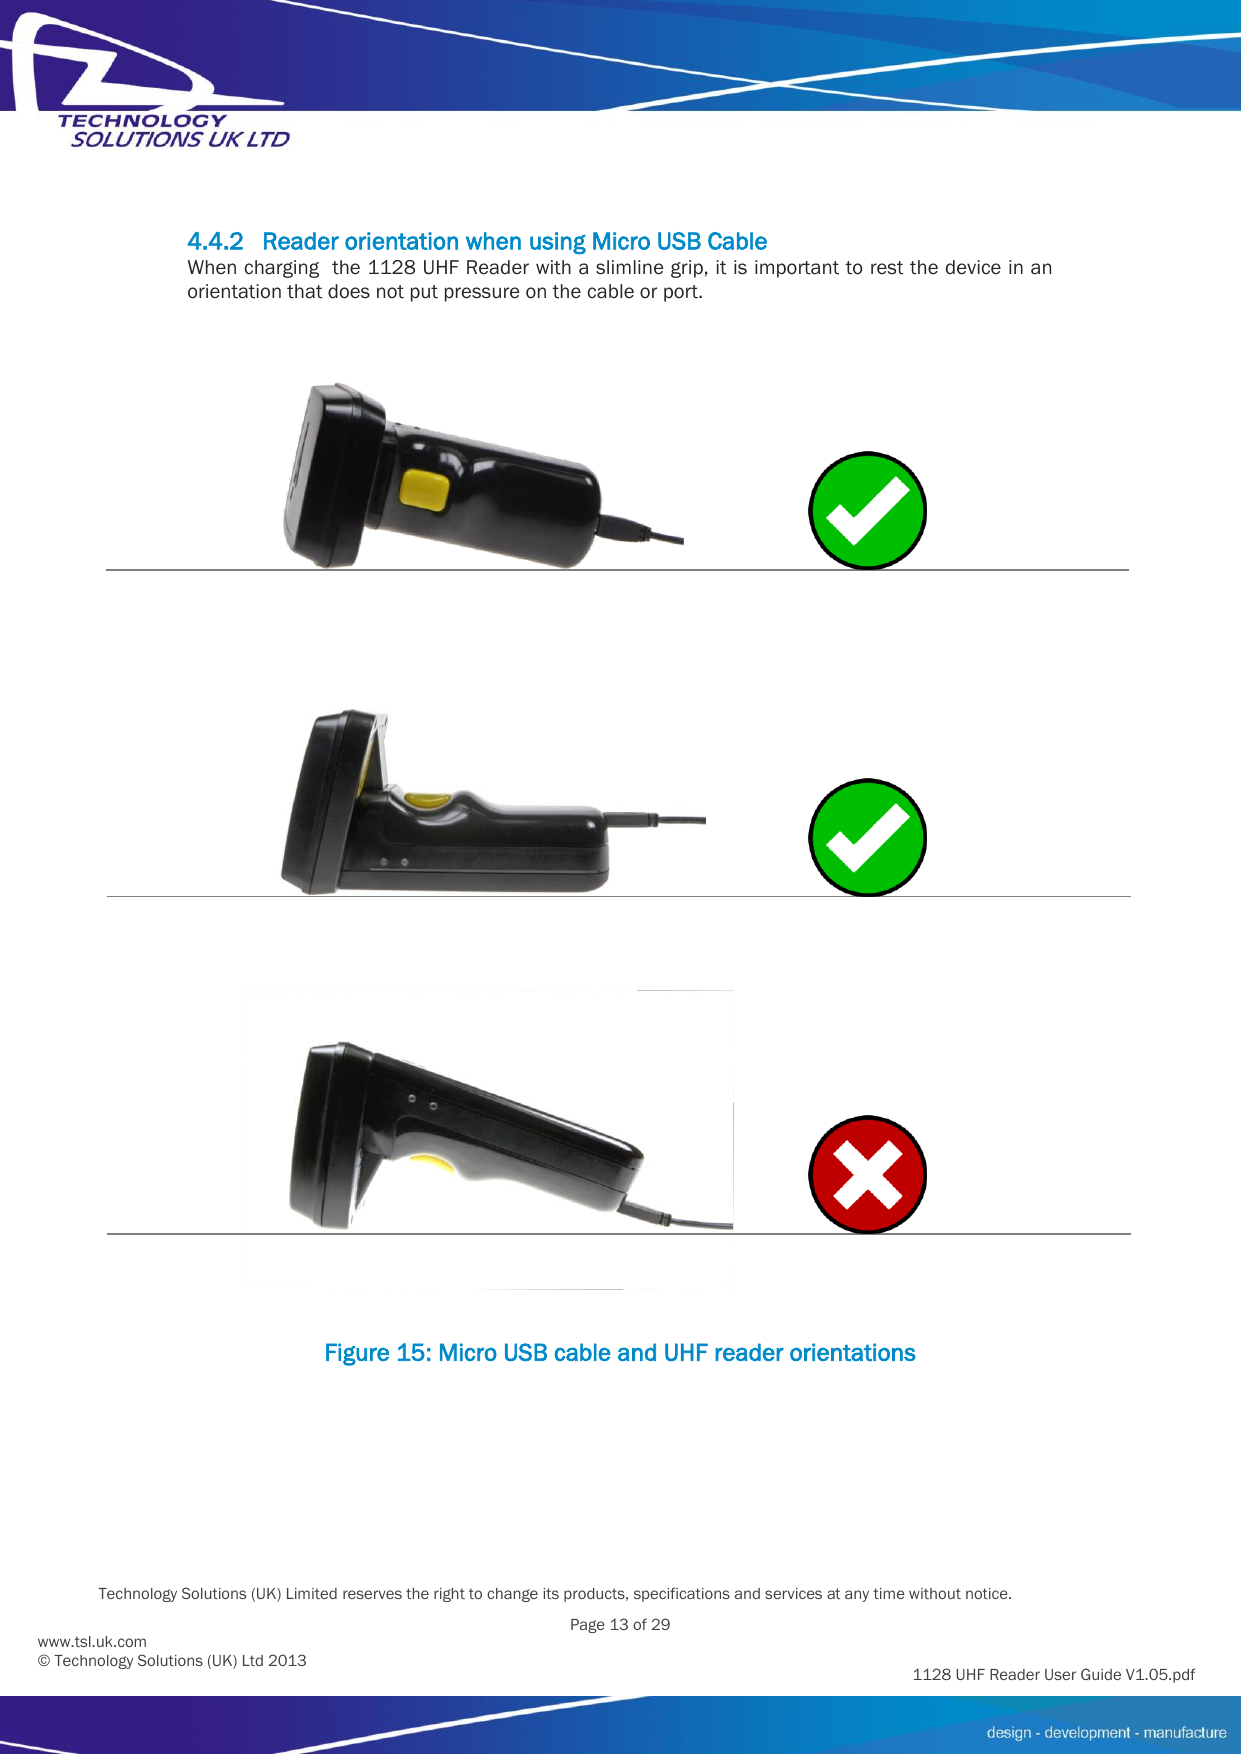          Technology Solutions (UK) Limited reserves the right to change its products, specifications and services at any time without notice.   Page 13 of 29 1128 UHF Reader User Guide V1.05.pdf www.tsl.uk.com © Technology Solutions (UK) Ltd 2013  4.4.2 Reader orientation when using Micro USB Cable When charging  the 1128 UHF Reader with a slimline grip, it is important to rest the device in an orientation that does not put pressure on the cable or port.  Figure 15: Micro USB cable and UHF reader orientations    